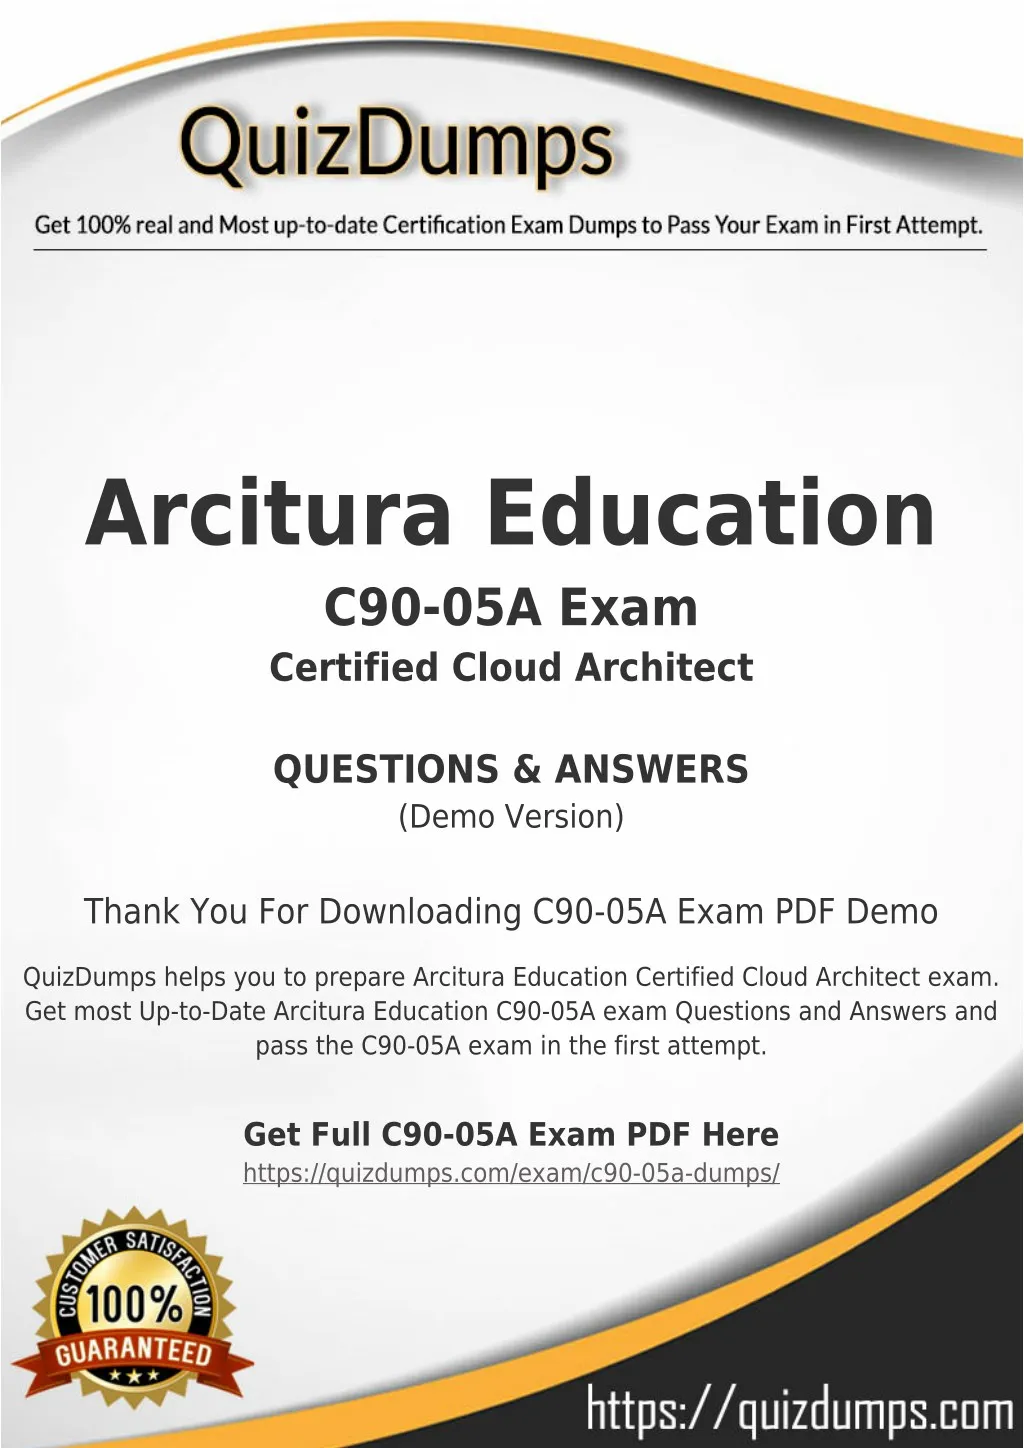 arcitura education c90 05a exam certified cloud